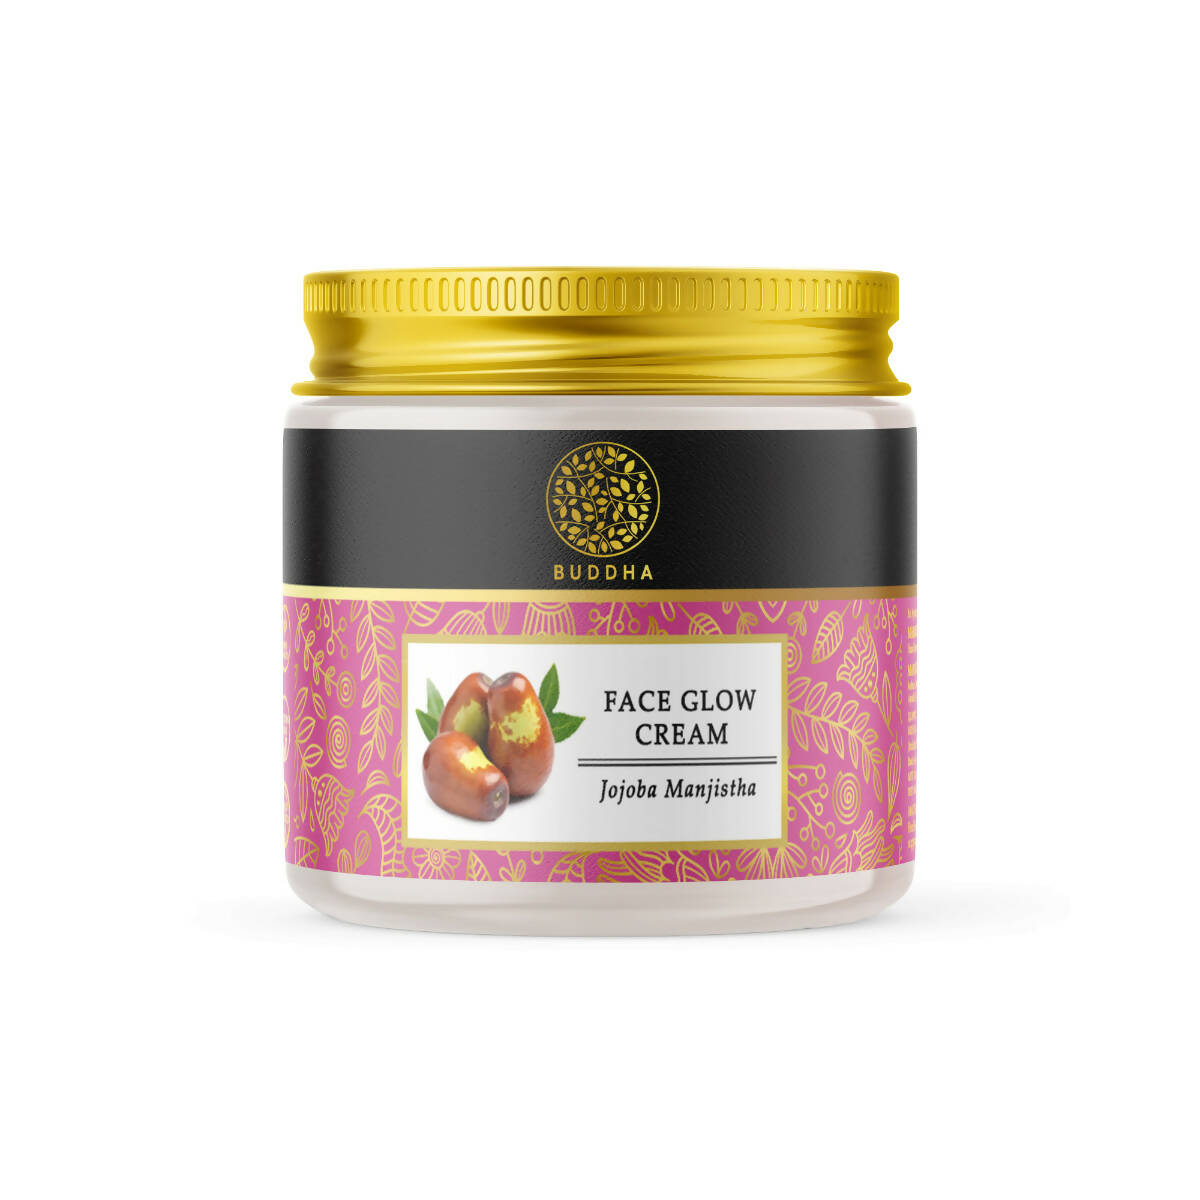 Buddha Natural Face Glow Cream - Helps Achieve an Instant White Glow and Shining, Bright Skin - BUDNE